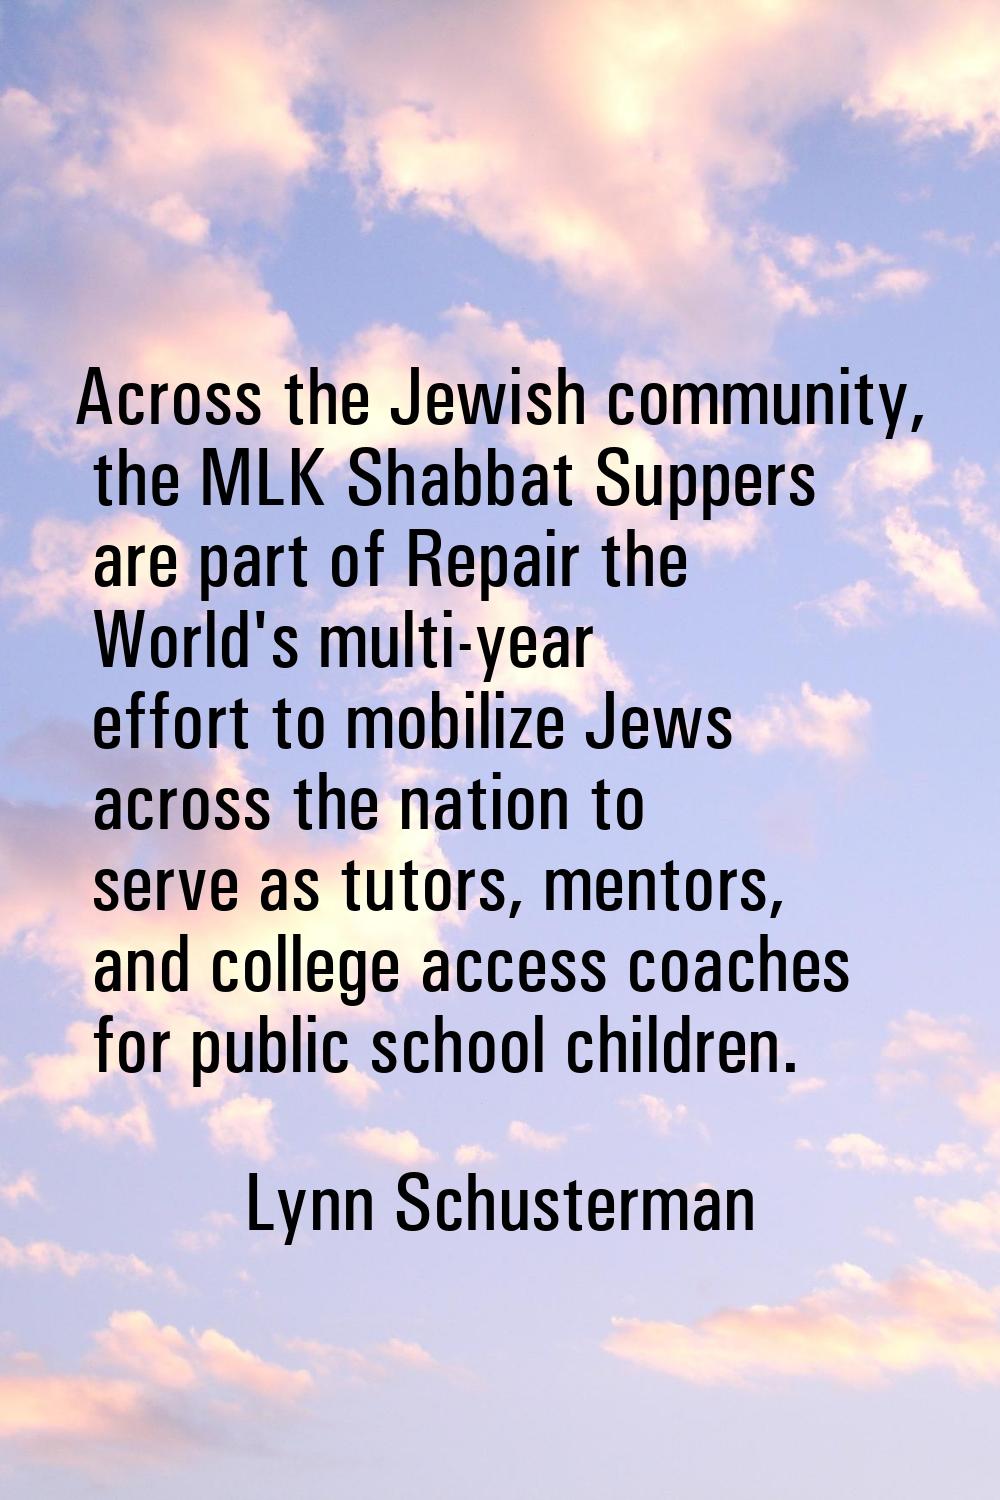 Across the Jewish community, the MLK Shabbat Suppers are part of Repair the World's multi-year effo